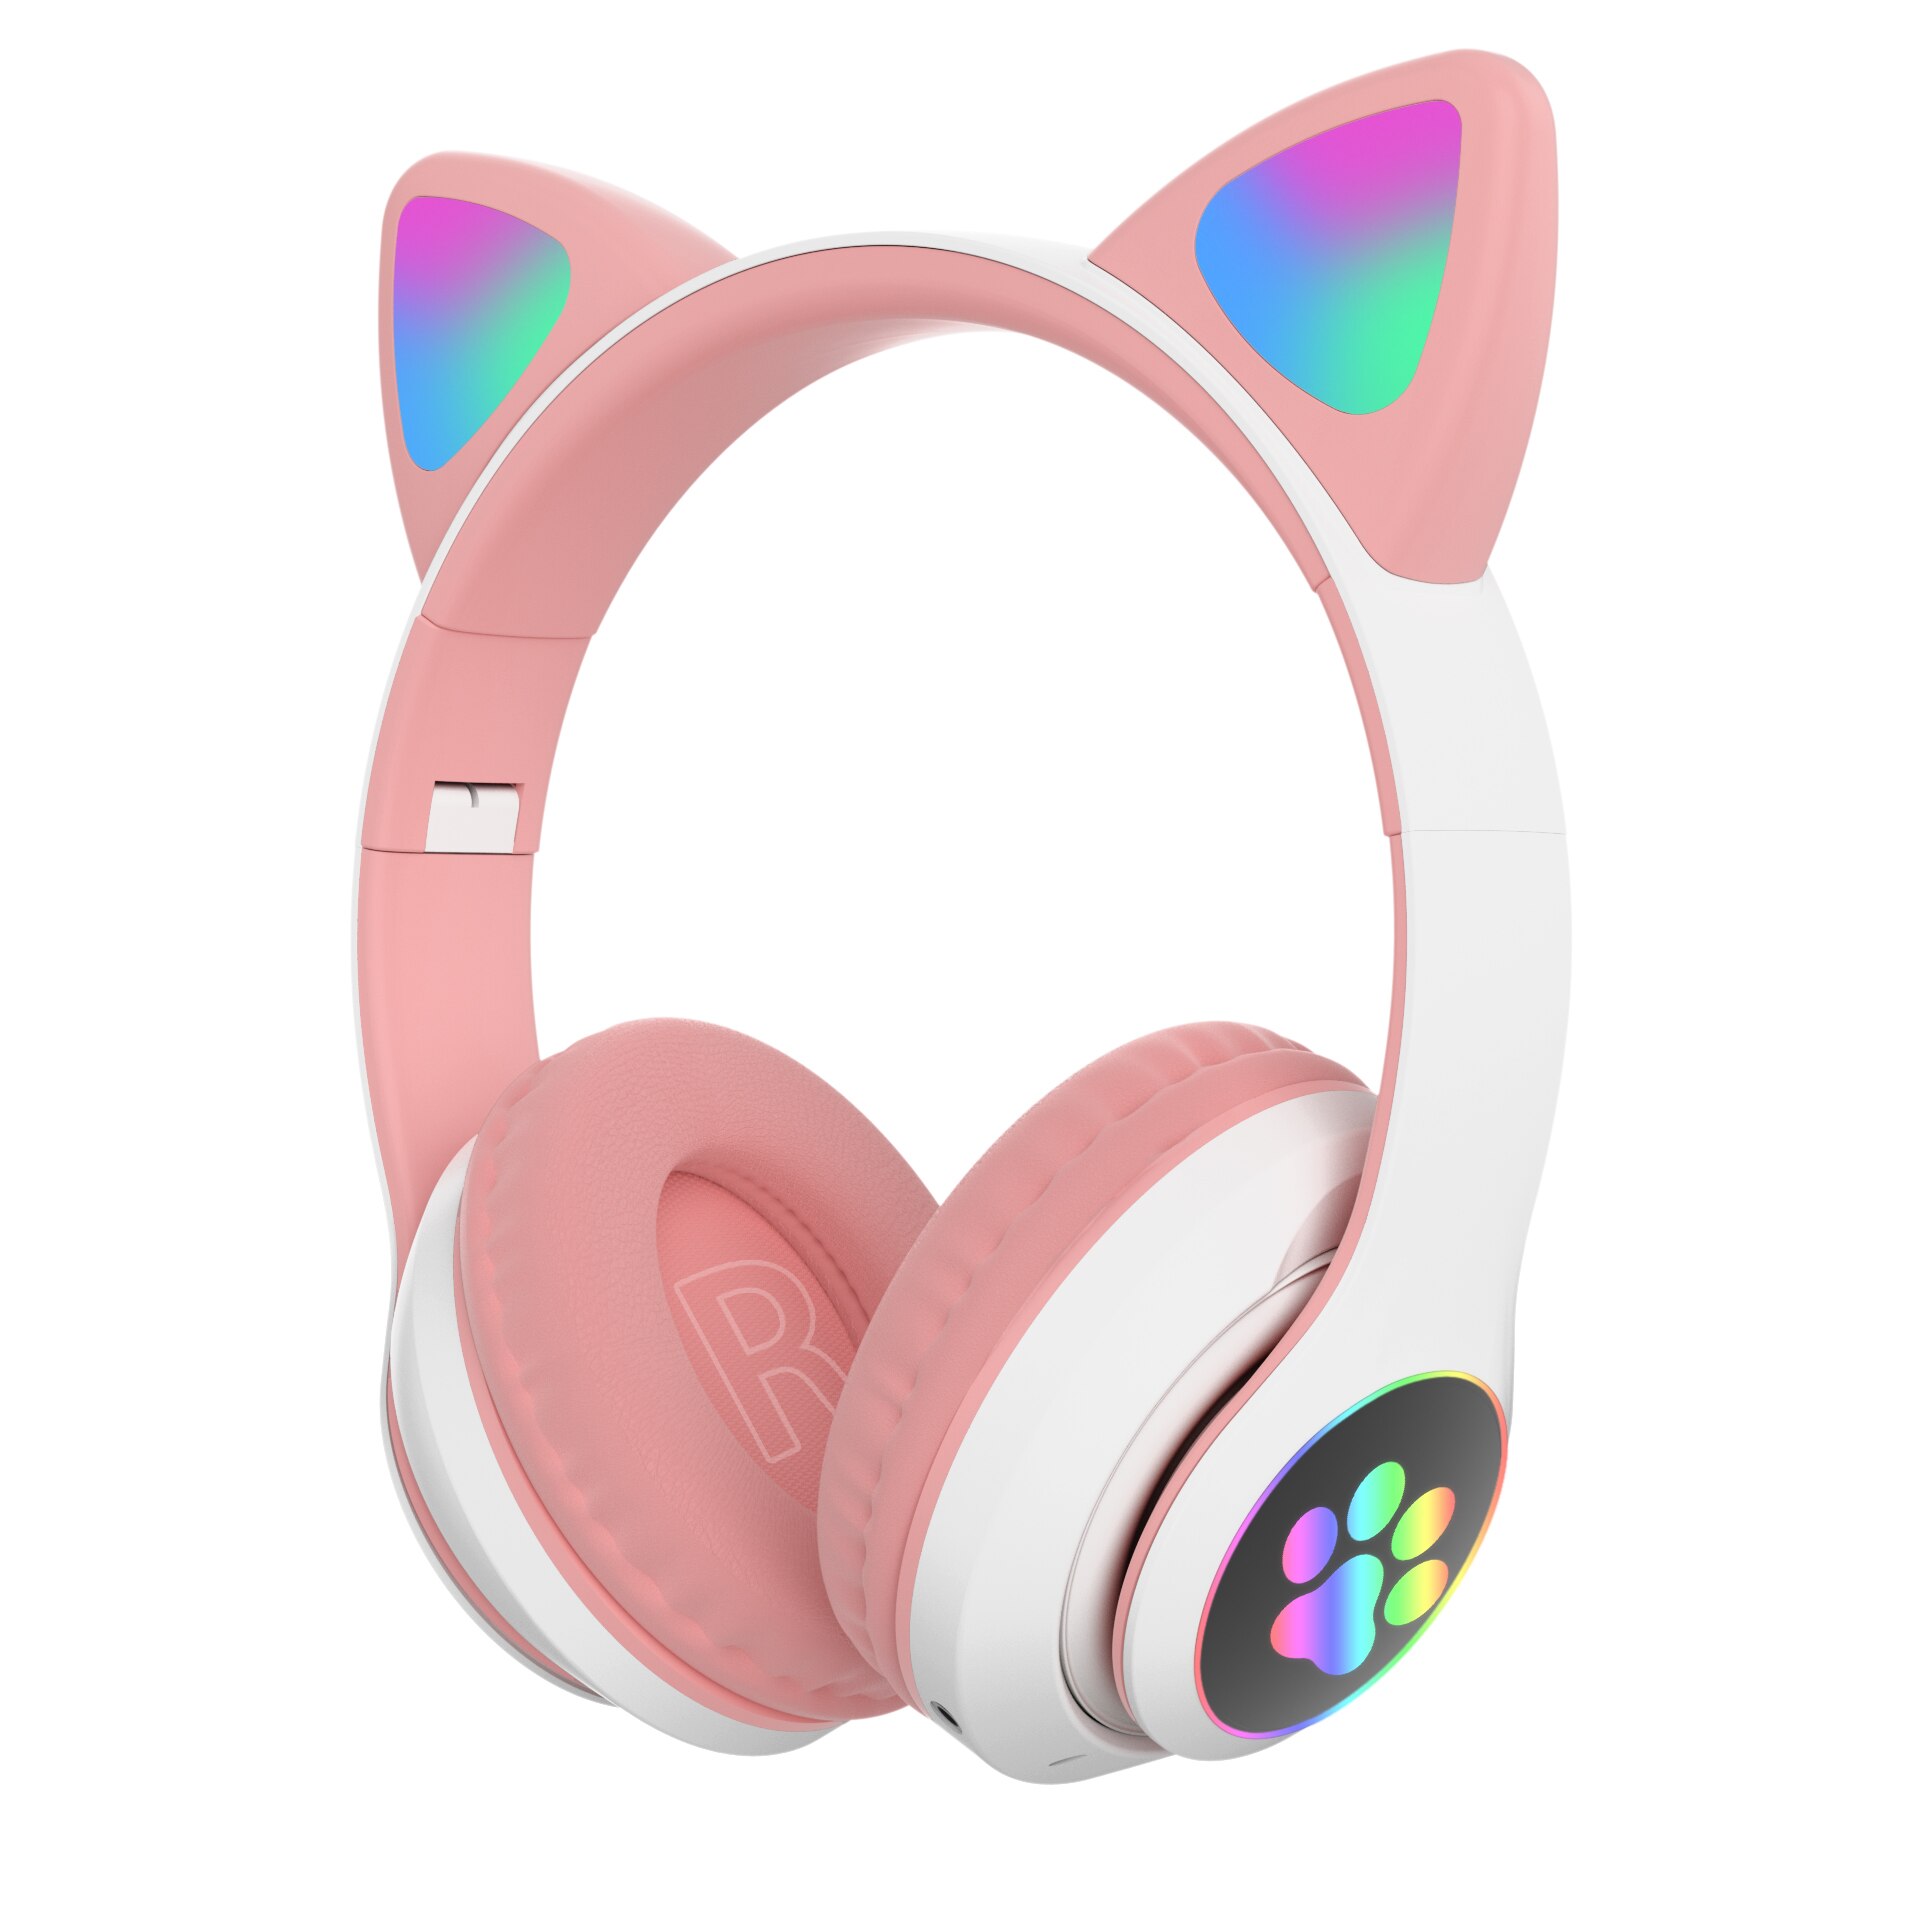 Flash Light Cute Cat Ear Headphones Wireless with Mic Can close LED Kids Girls Stereo Phone Music Bluetooth Headset Gamer: White Pink